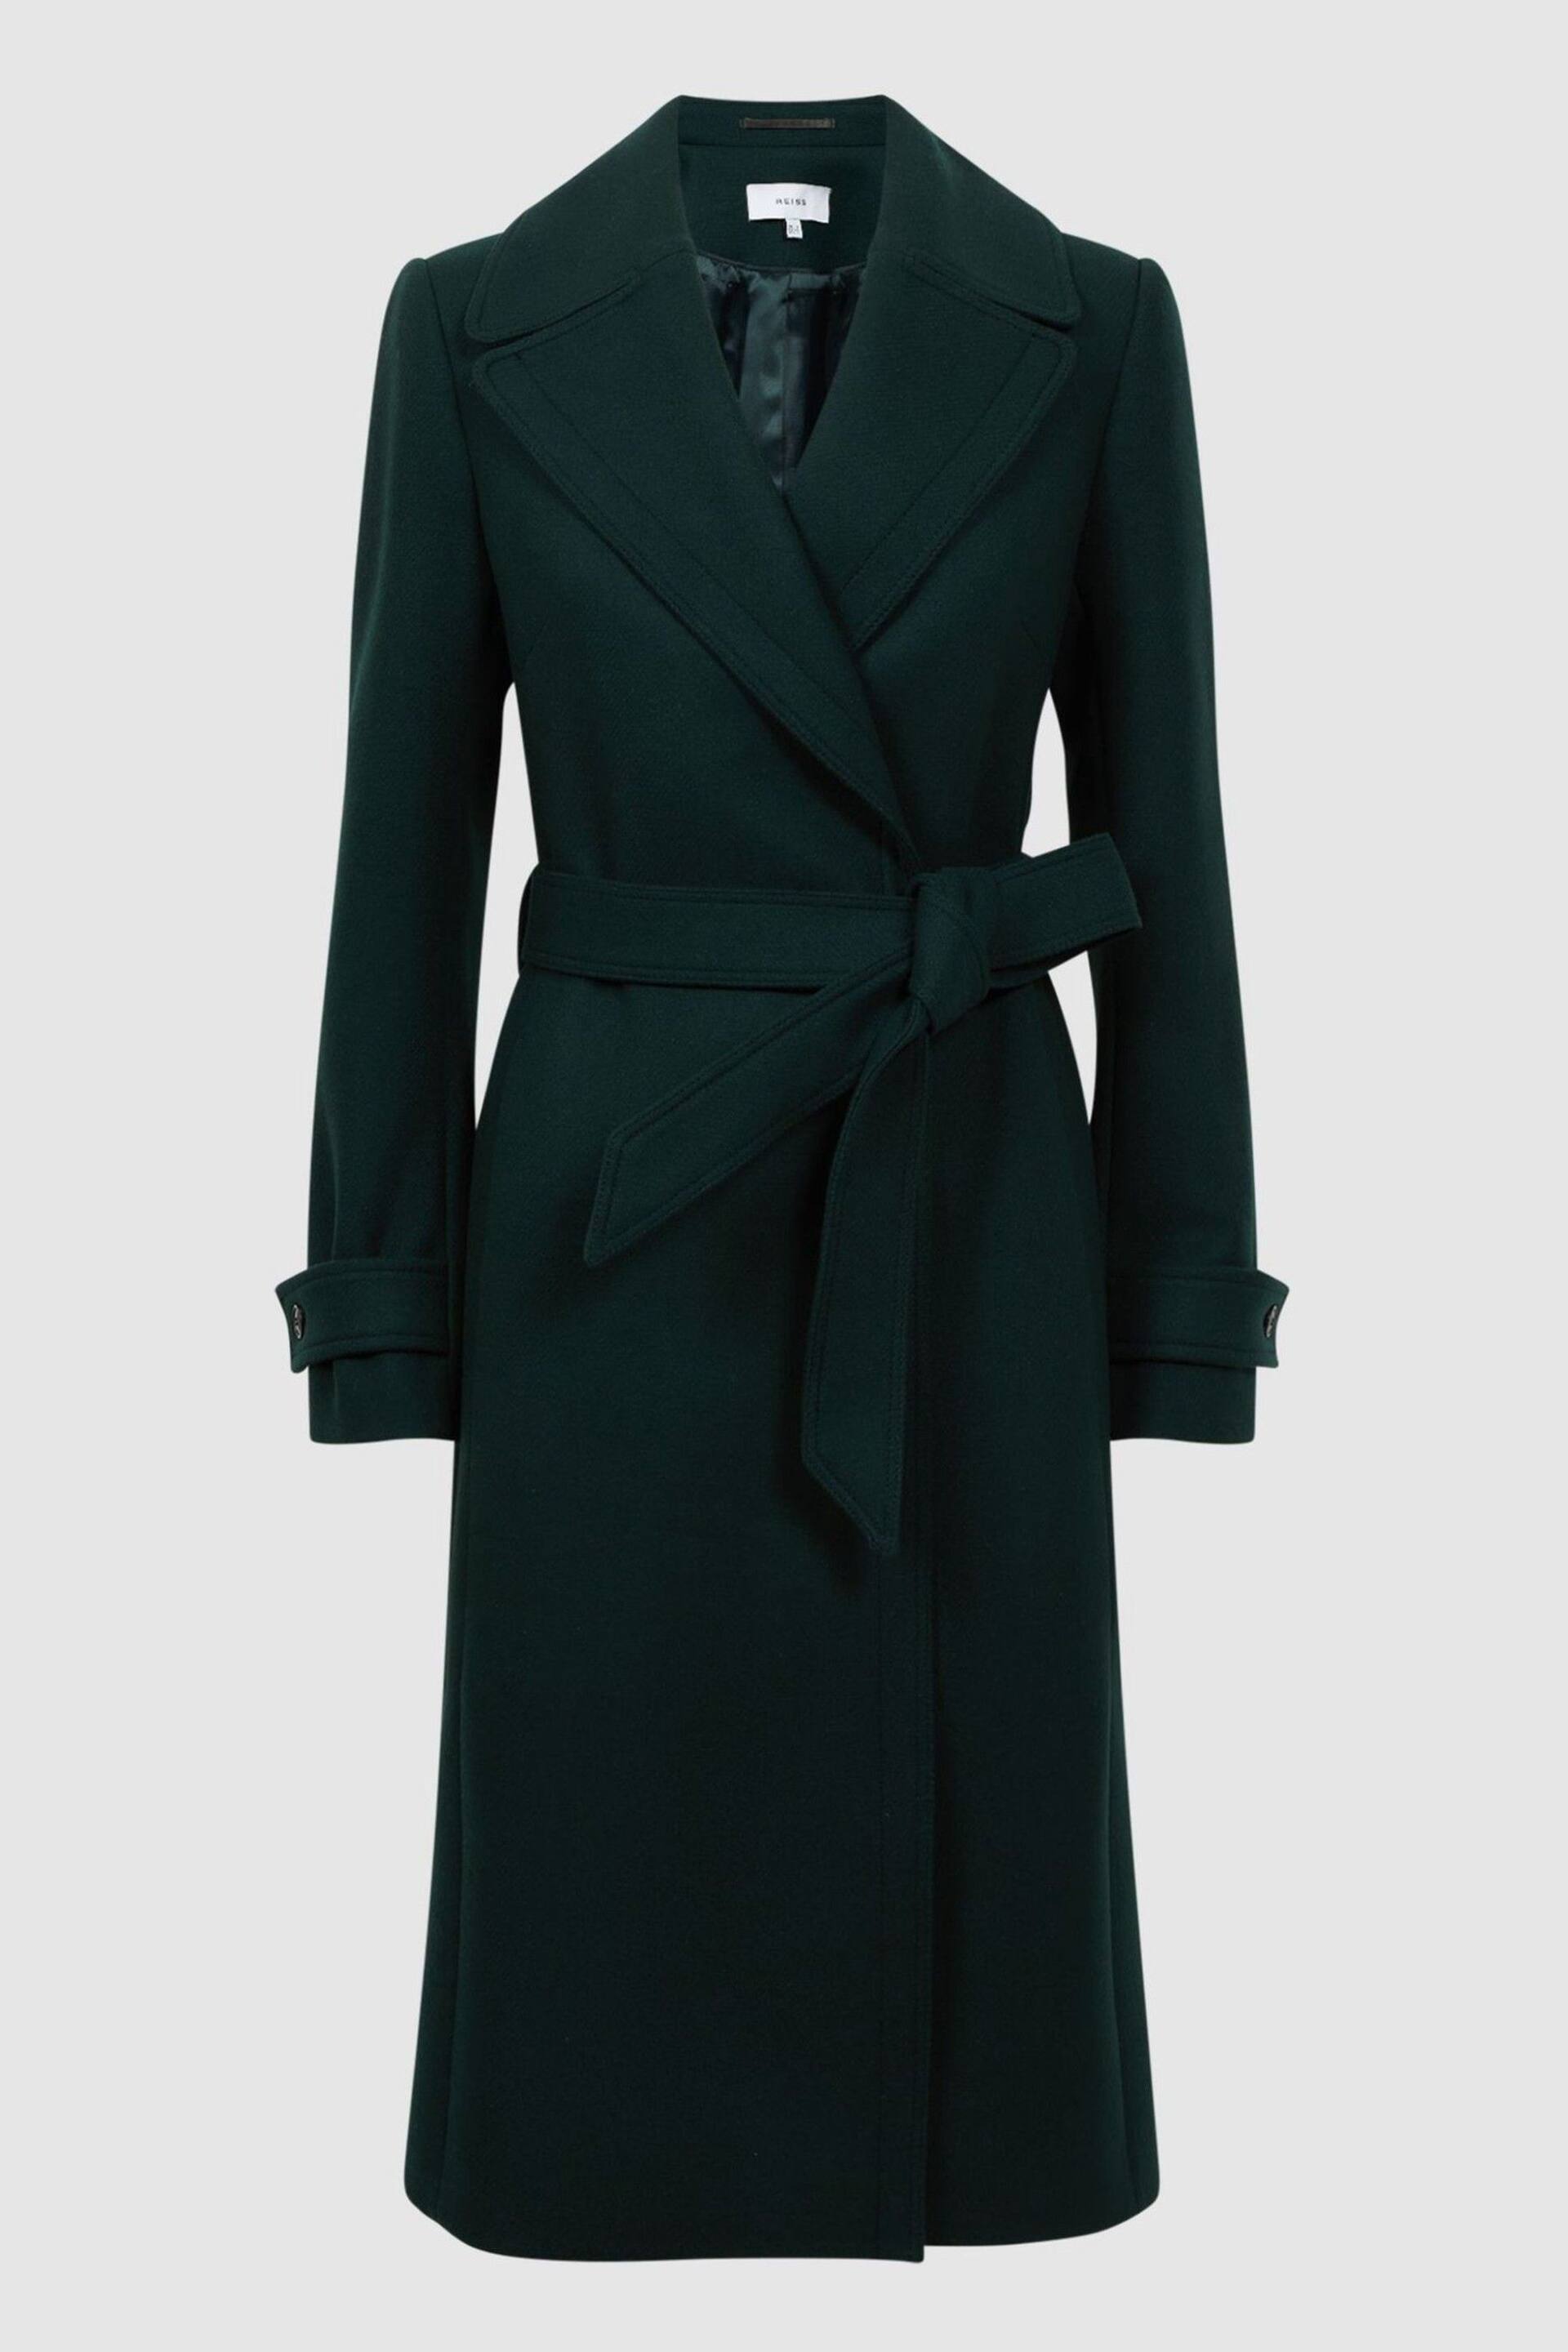 Reiss Green Tor Relaxed Wool Blend Belted Coat - Image 2 of 5